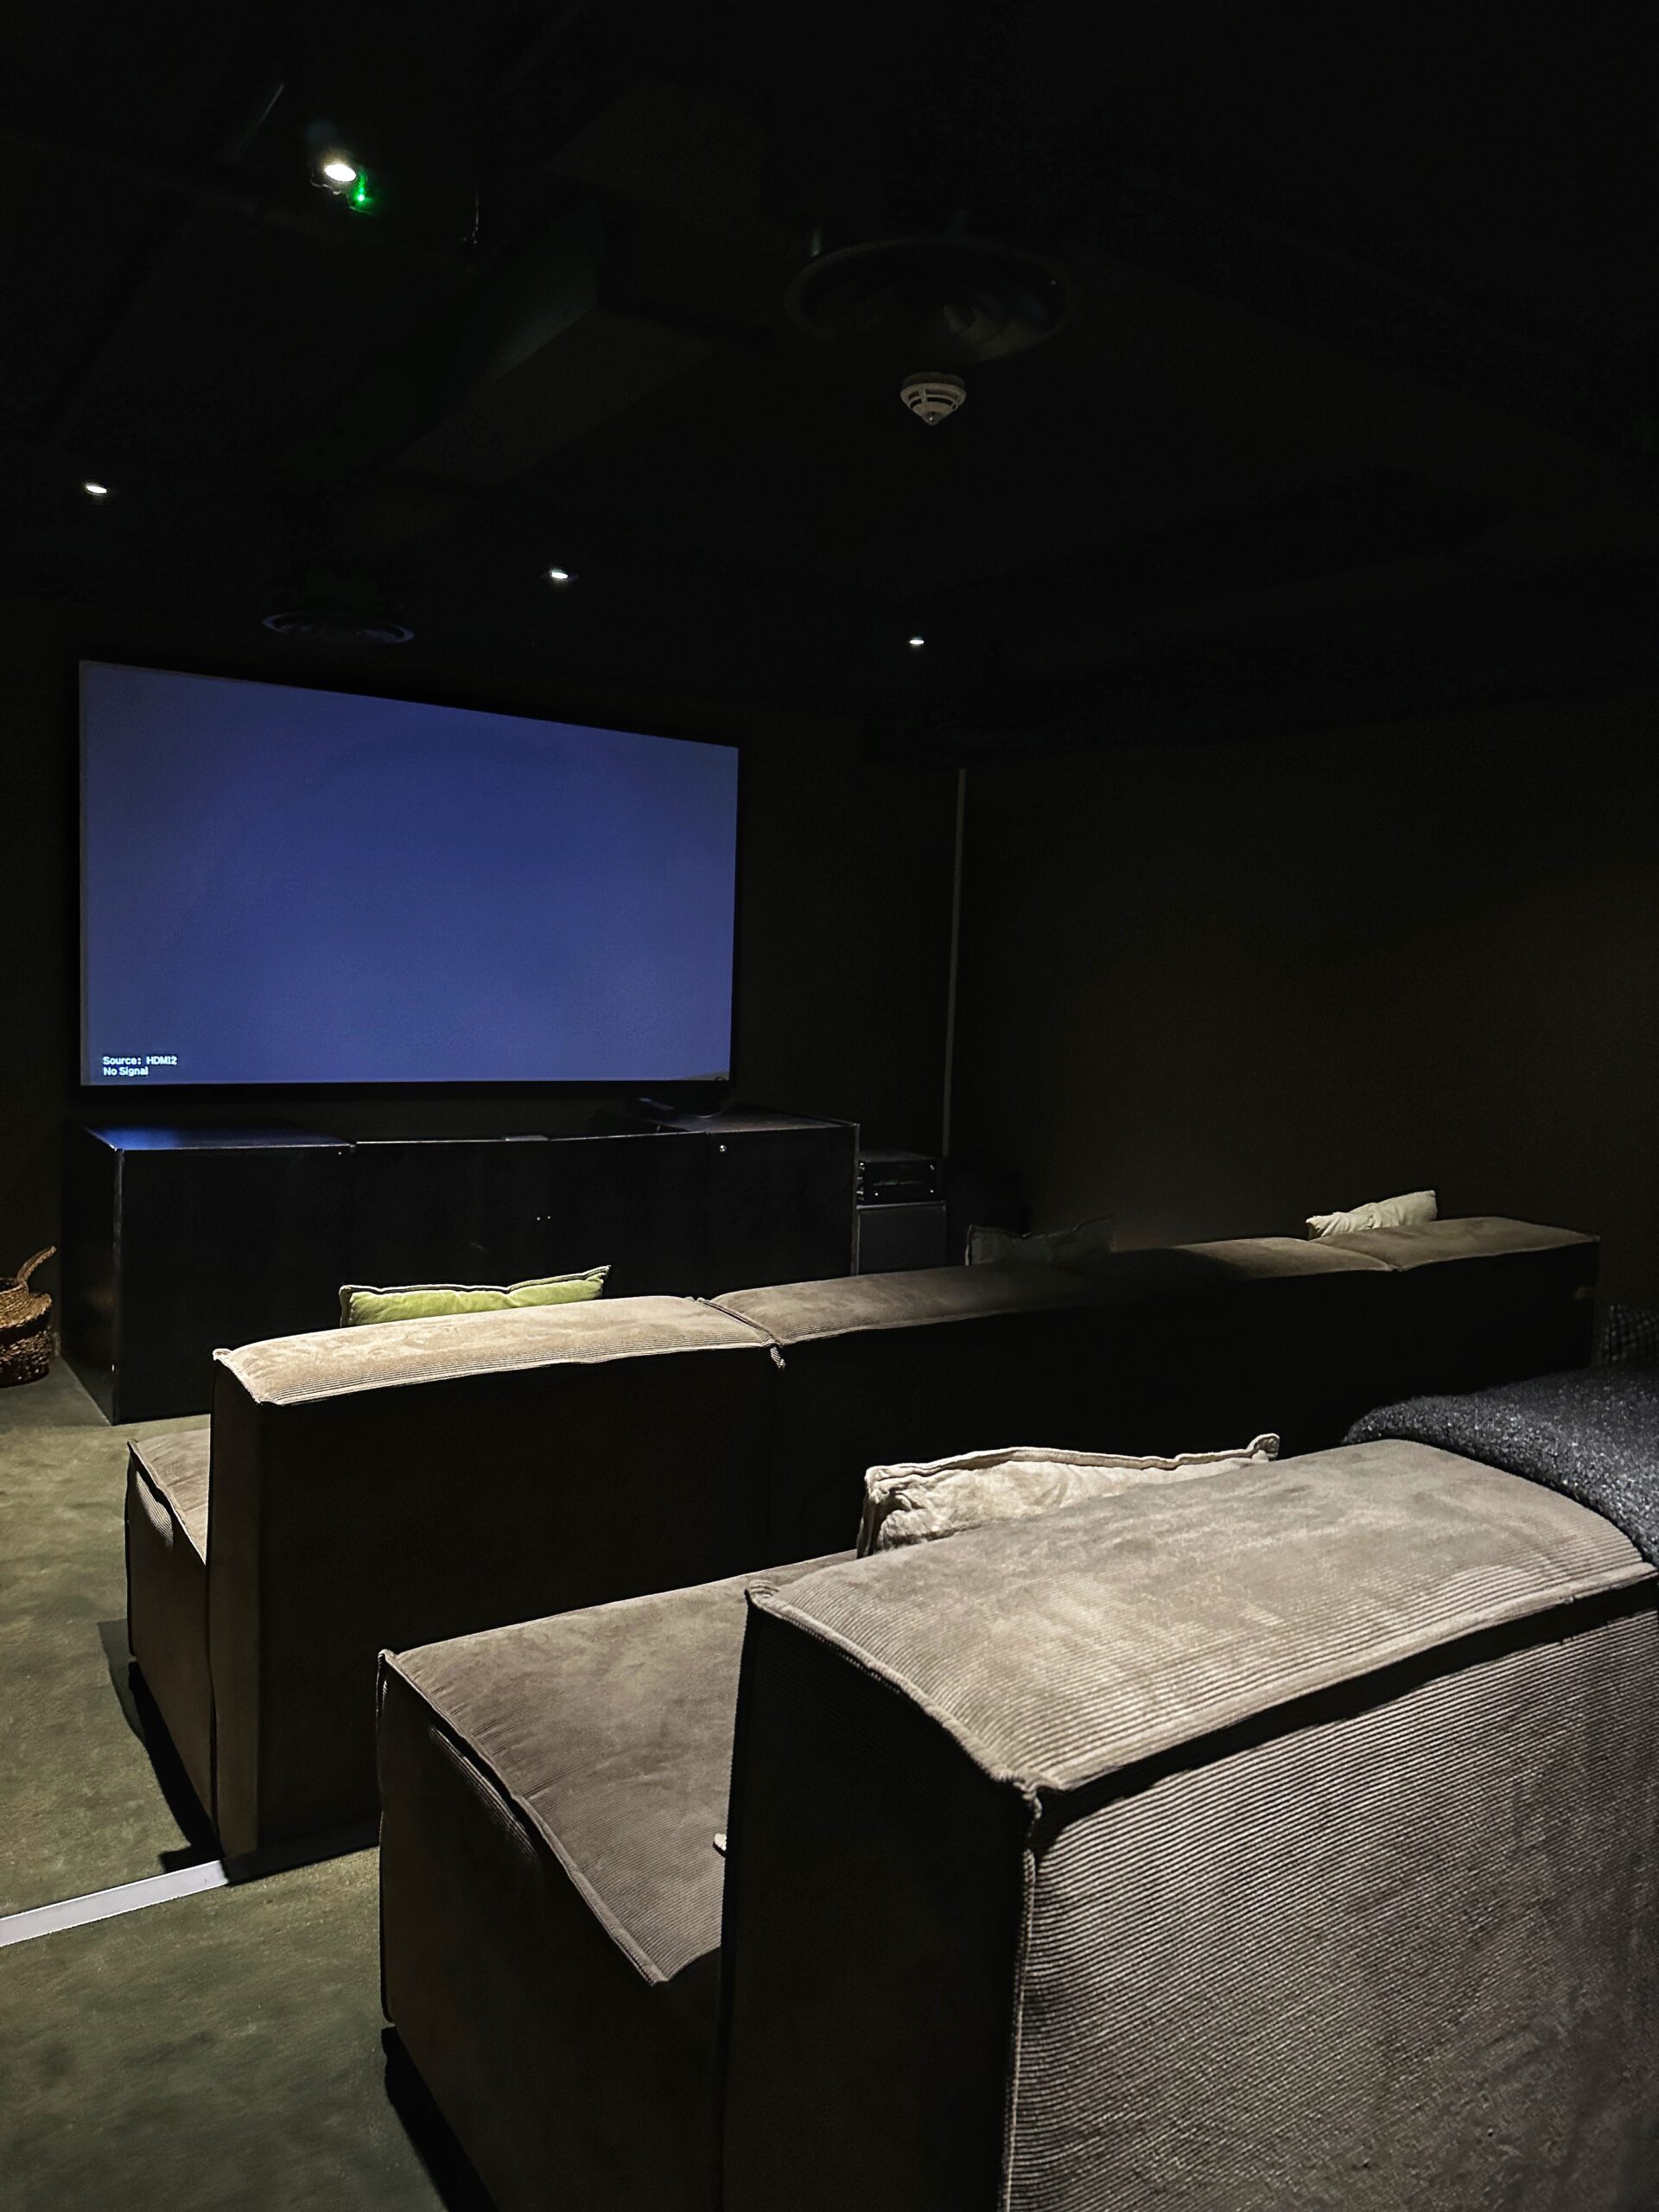 Amenities at Kampus include access to a private cinema